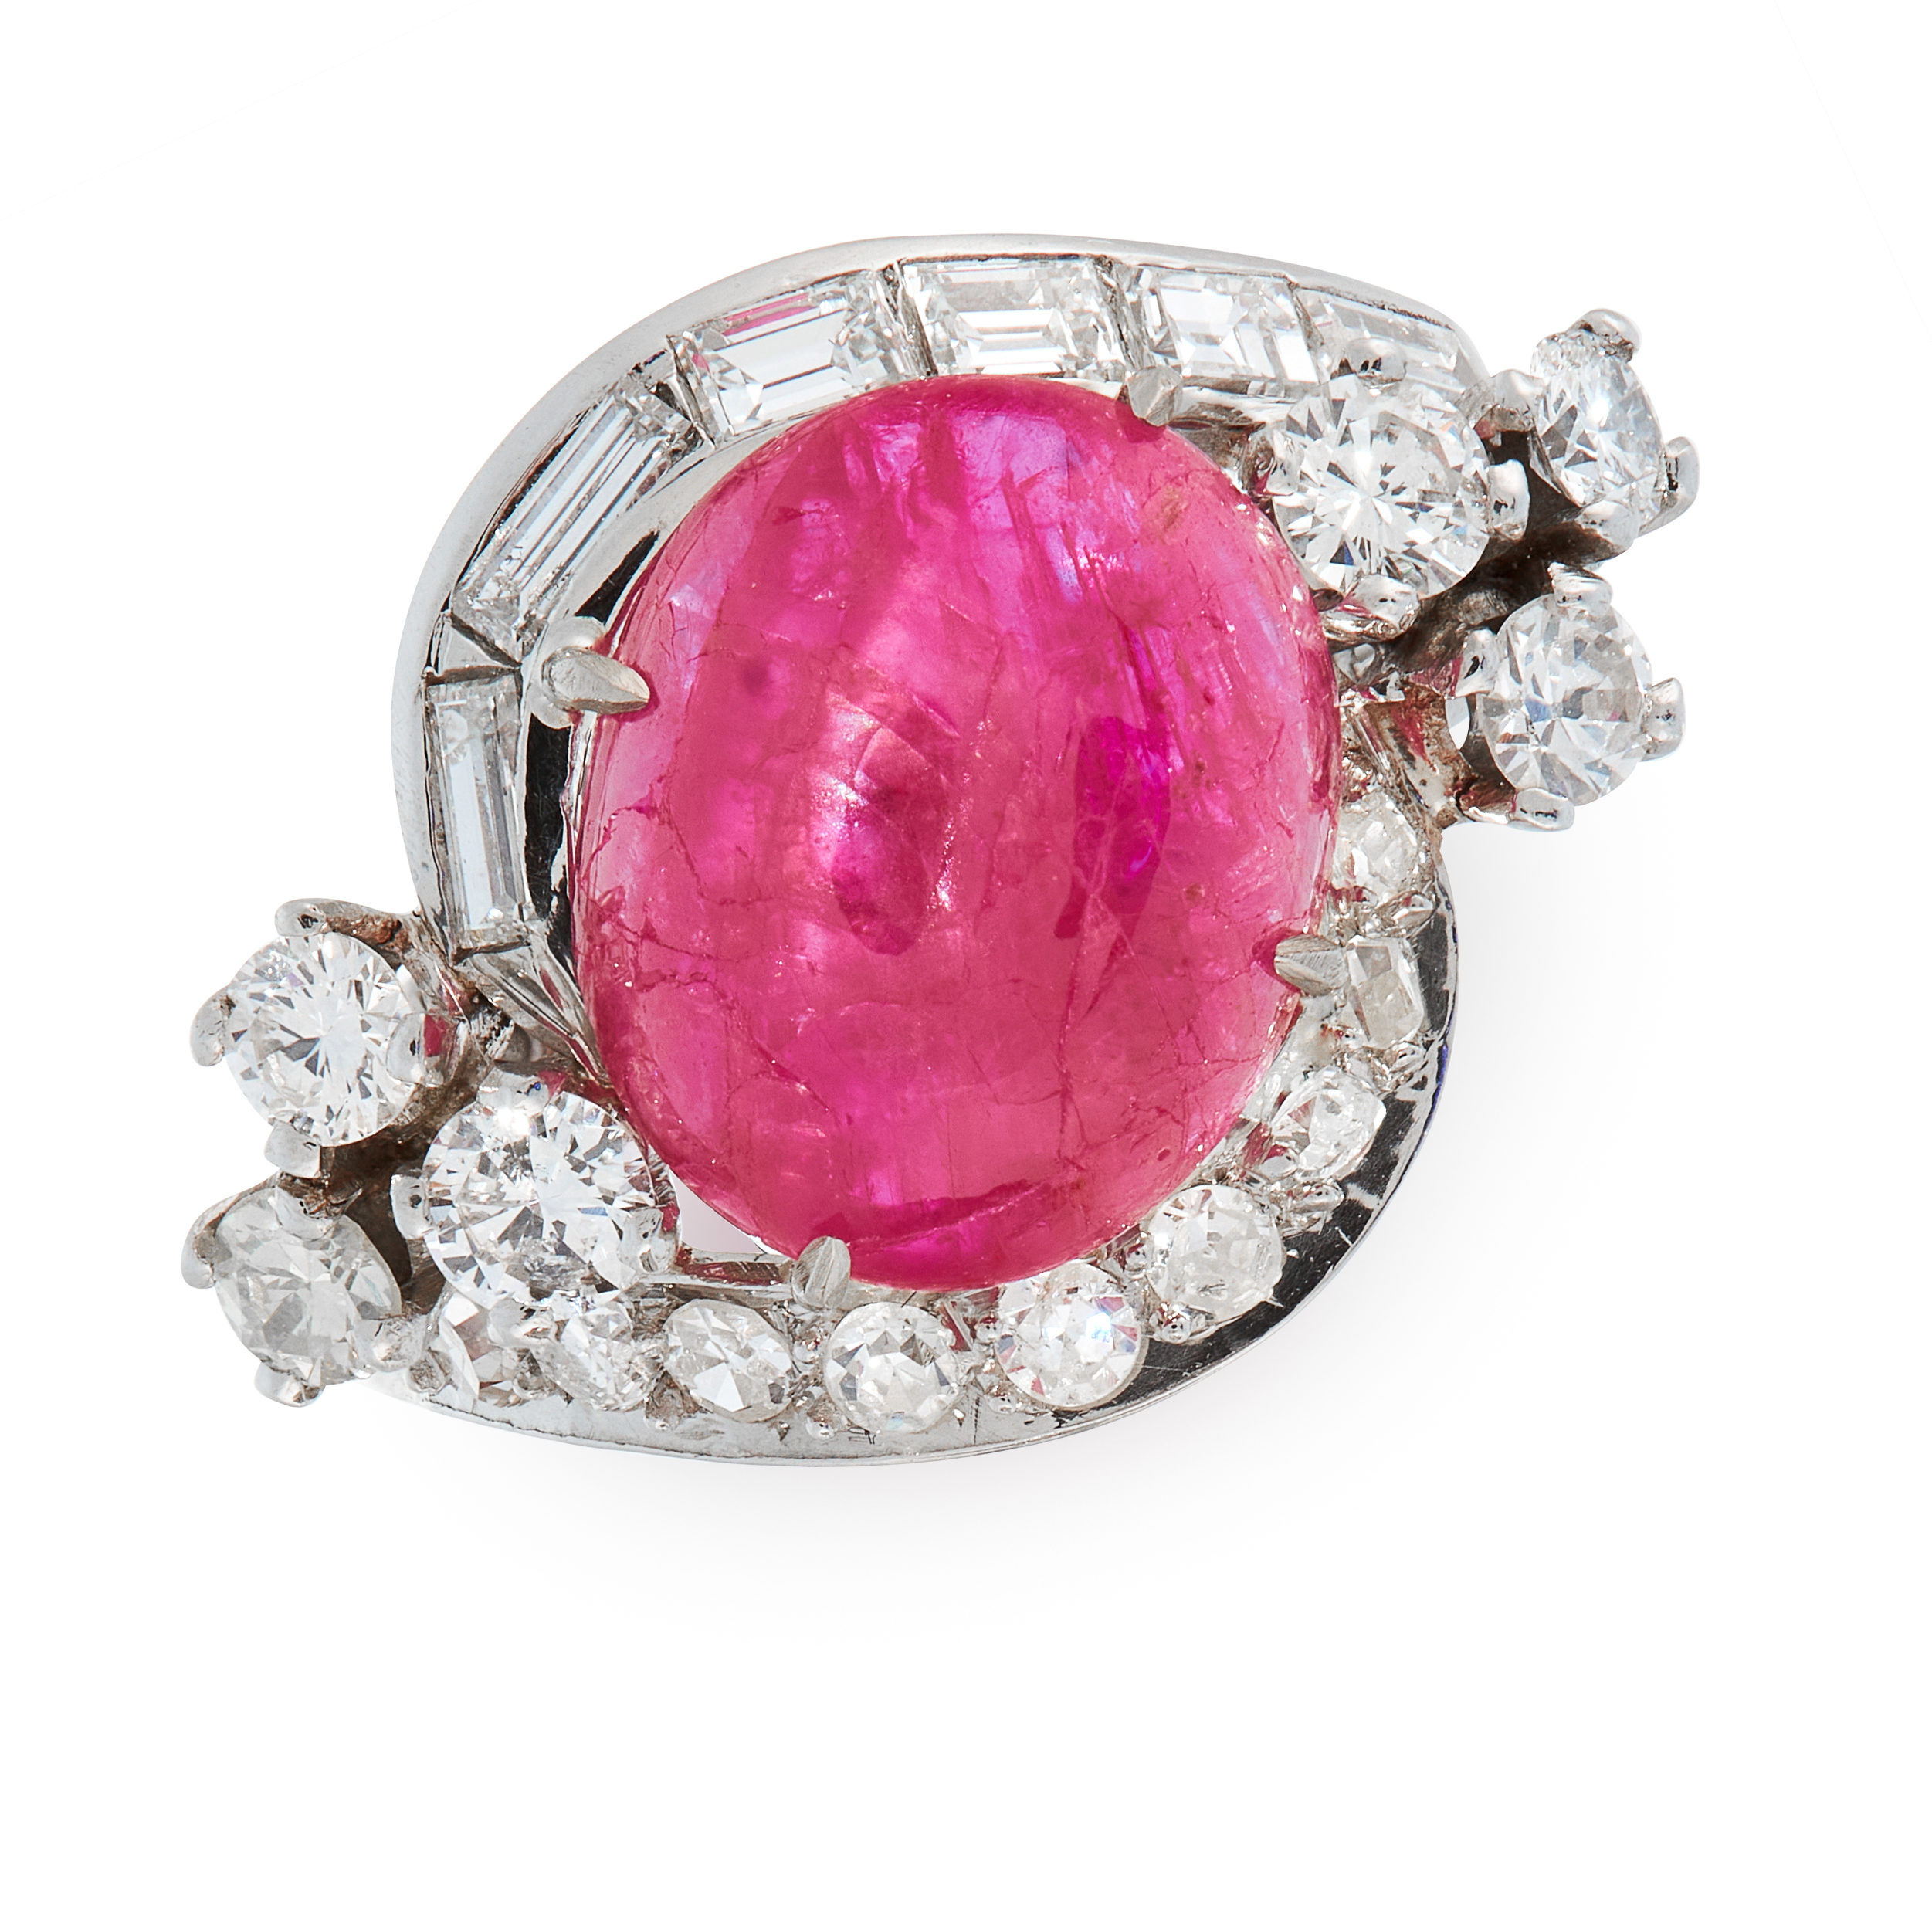 A BURMA NO HEAT STAR RUBY AND DIAMOND DRESS RING set with an oval cabochon star ruby of 5.26 carats,